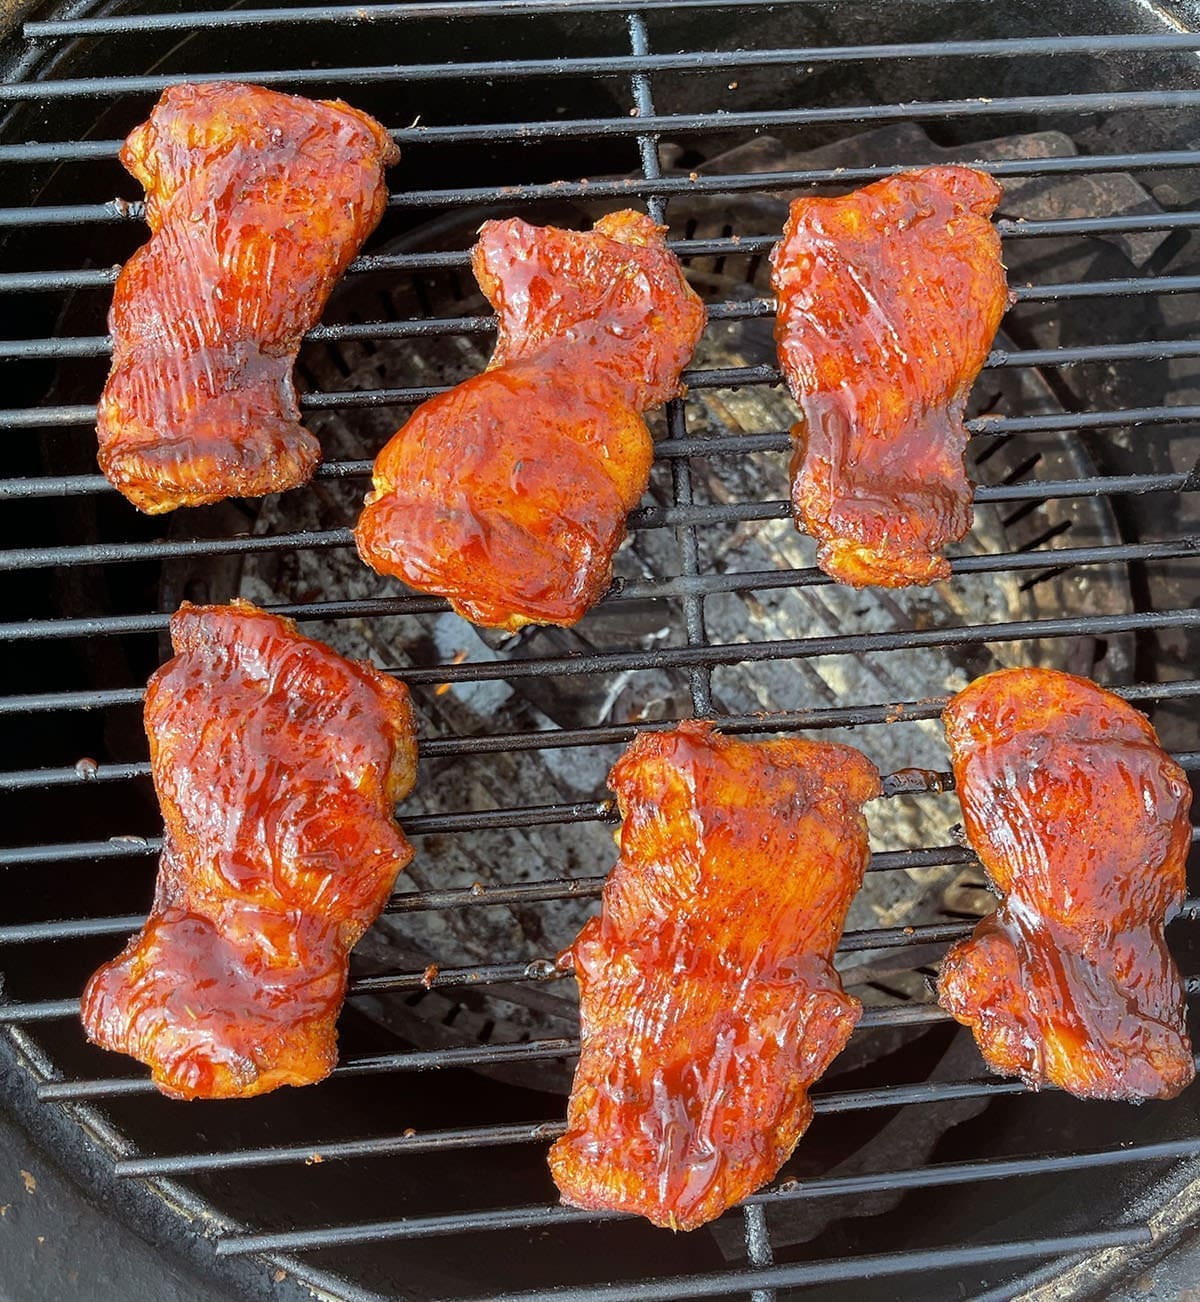 BBQ Smoked Chicken on the grill.